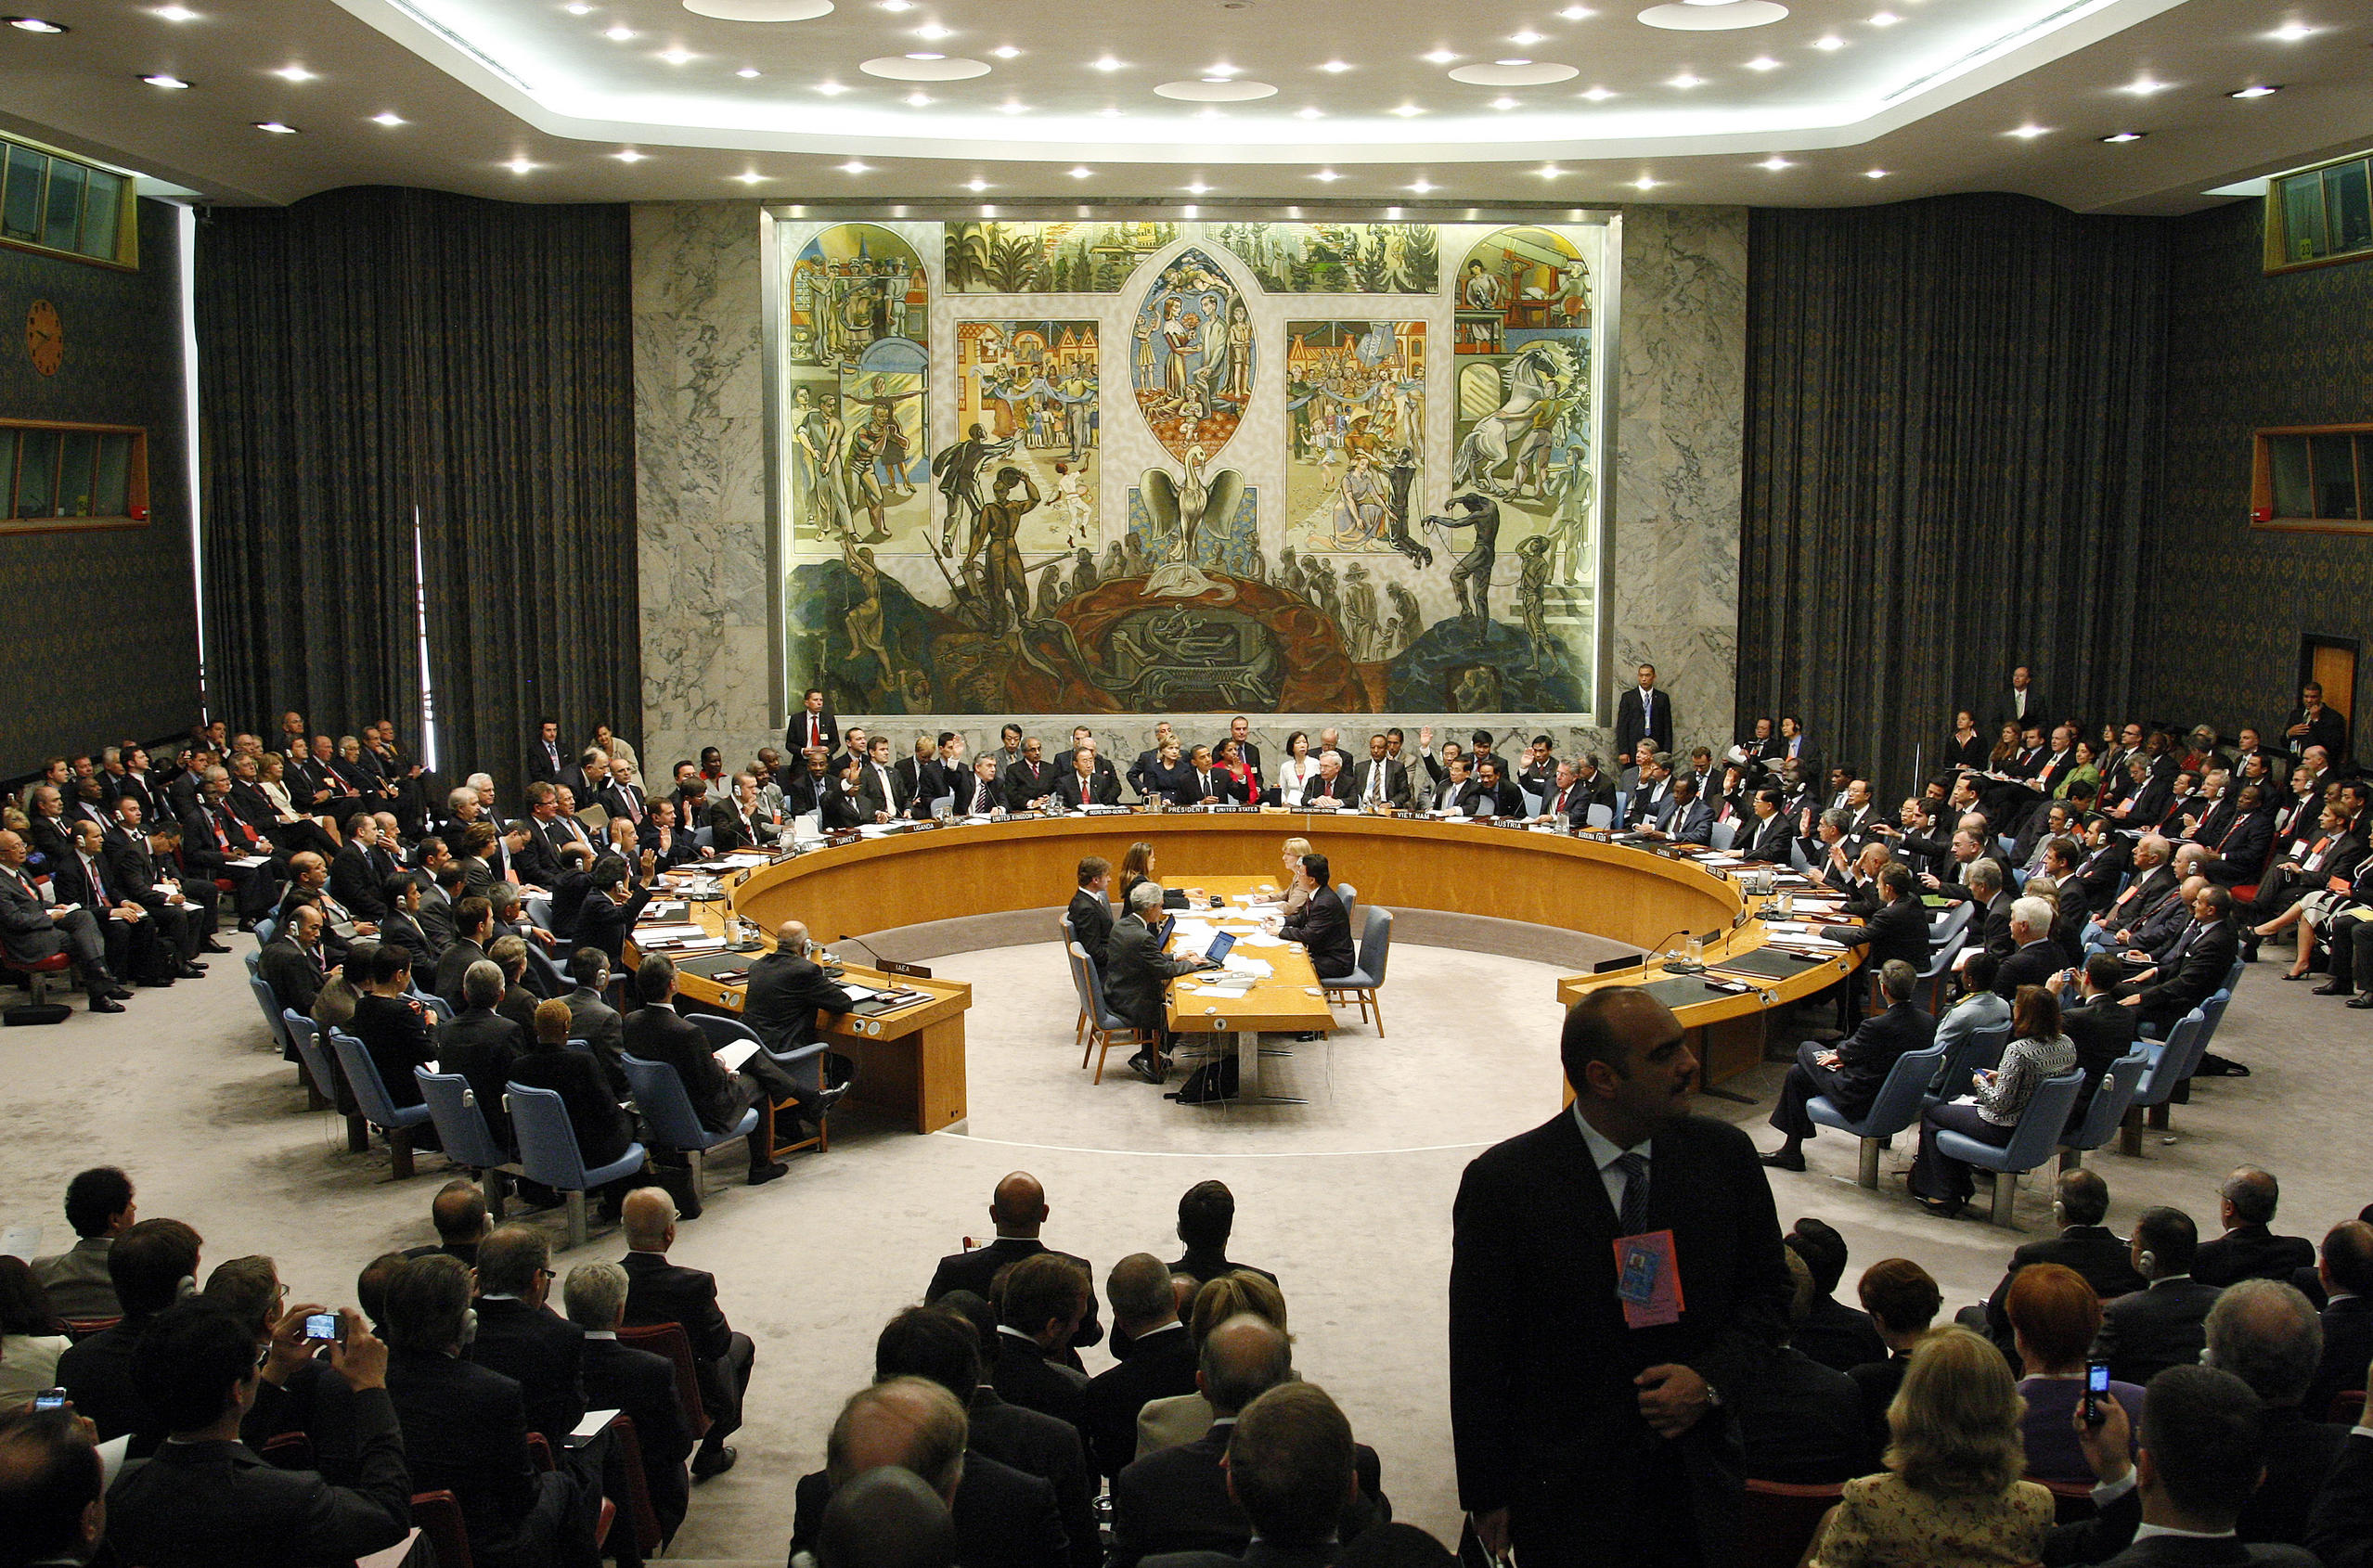 The U.S. “Abstention” on U.N. Resolution 2334 Condemning Israeli Settlements: Who Won?